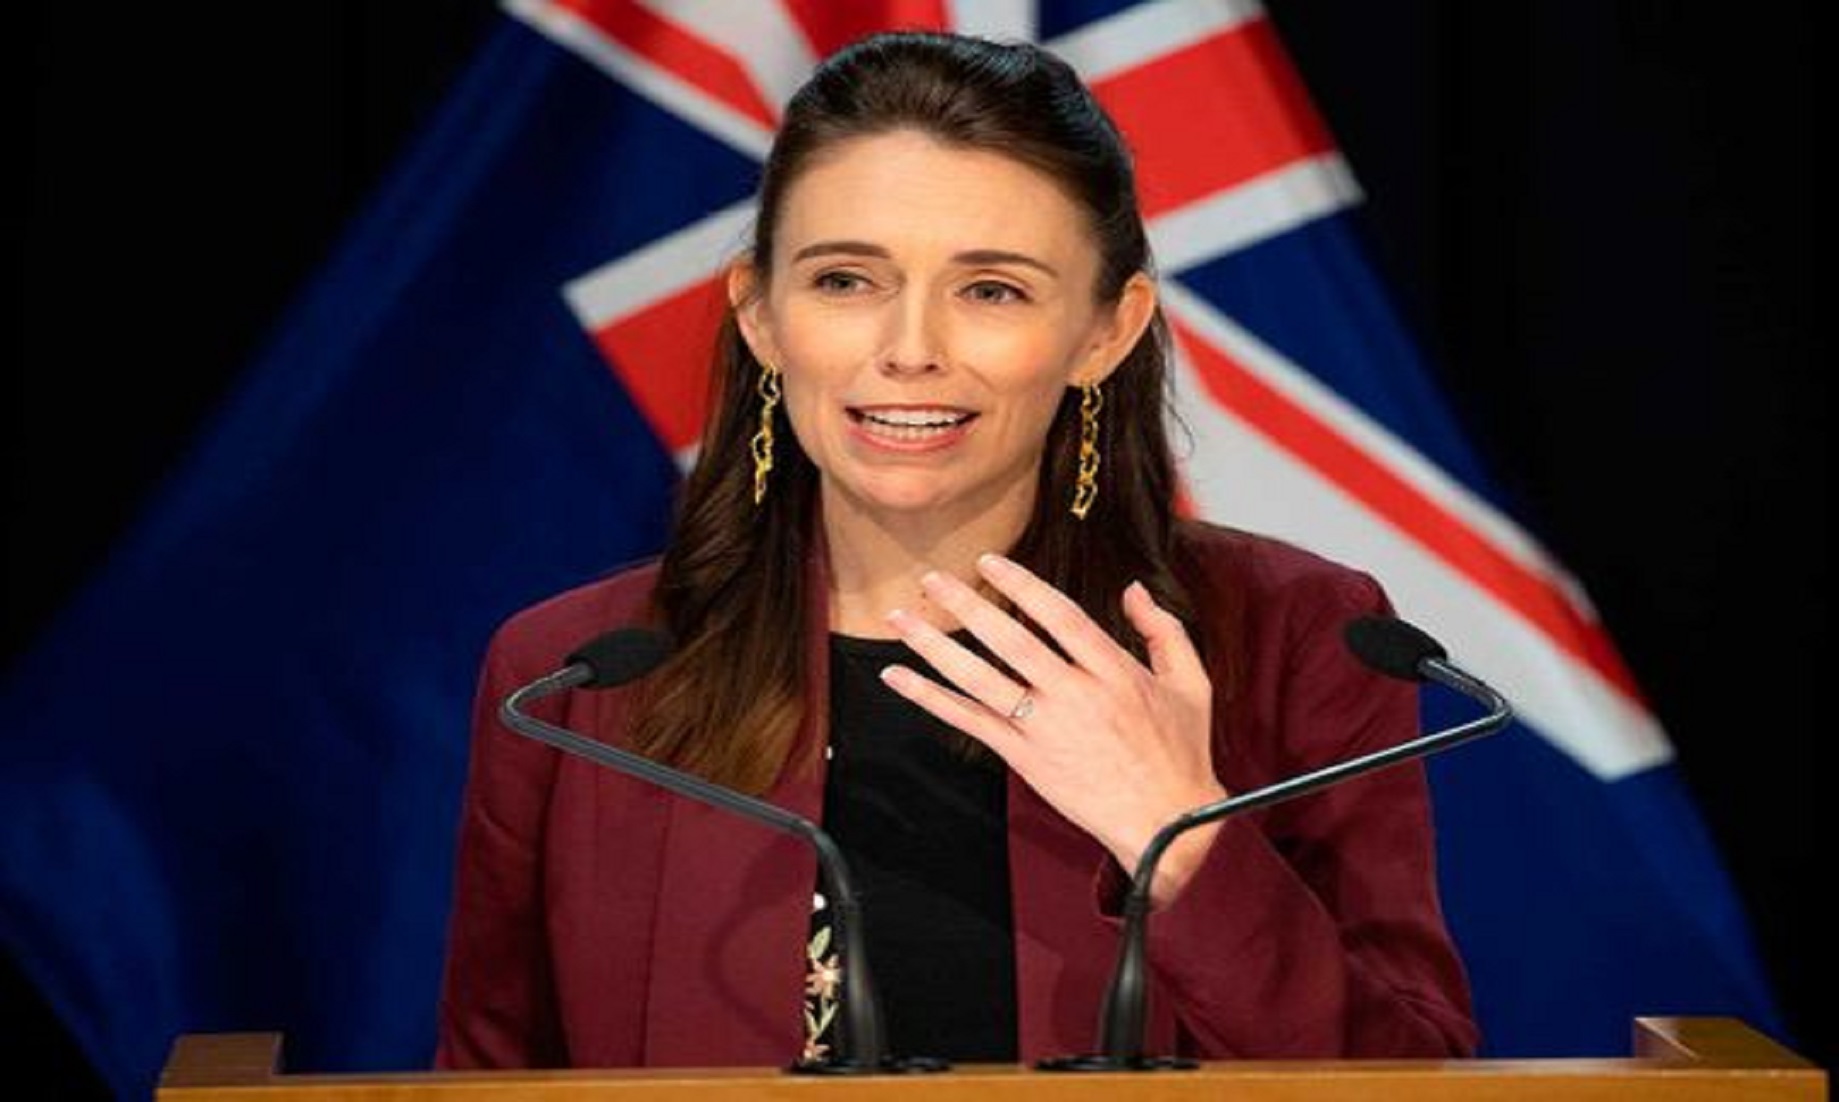 No more active COVID-19 cases in New Zealand, says PM Jacinda Ardern